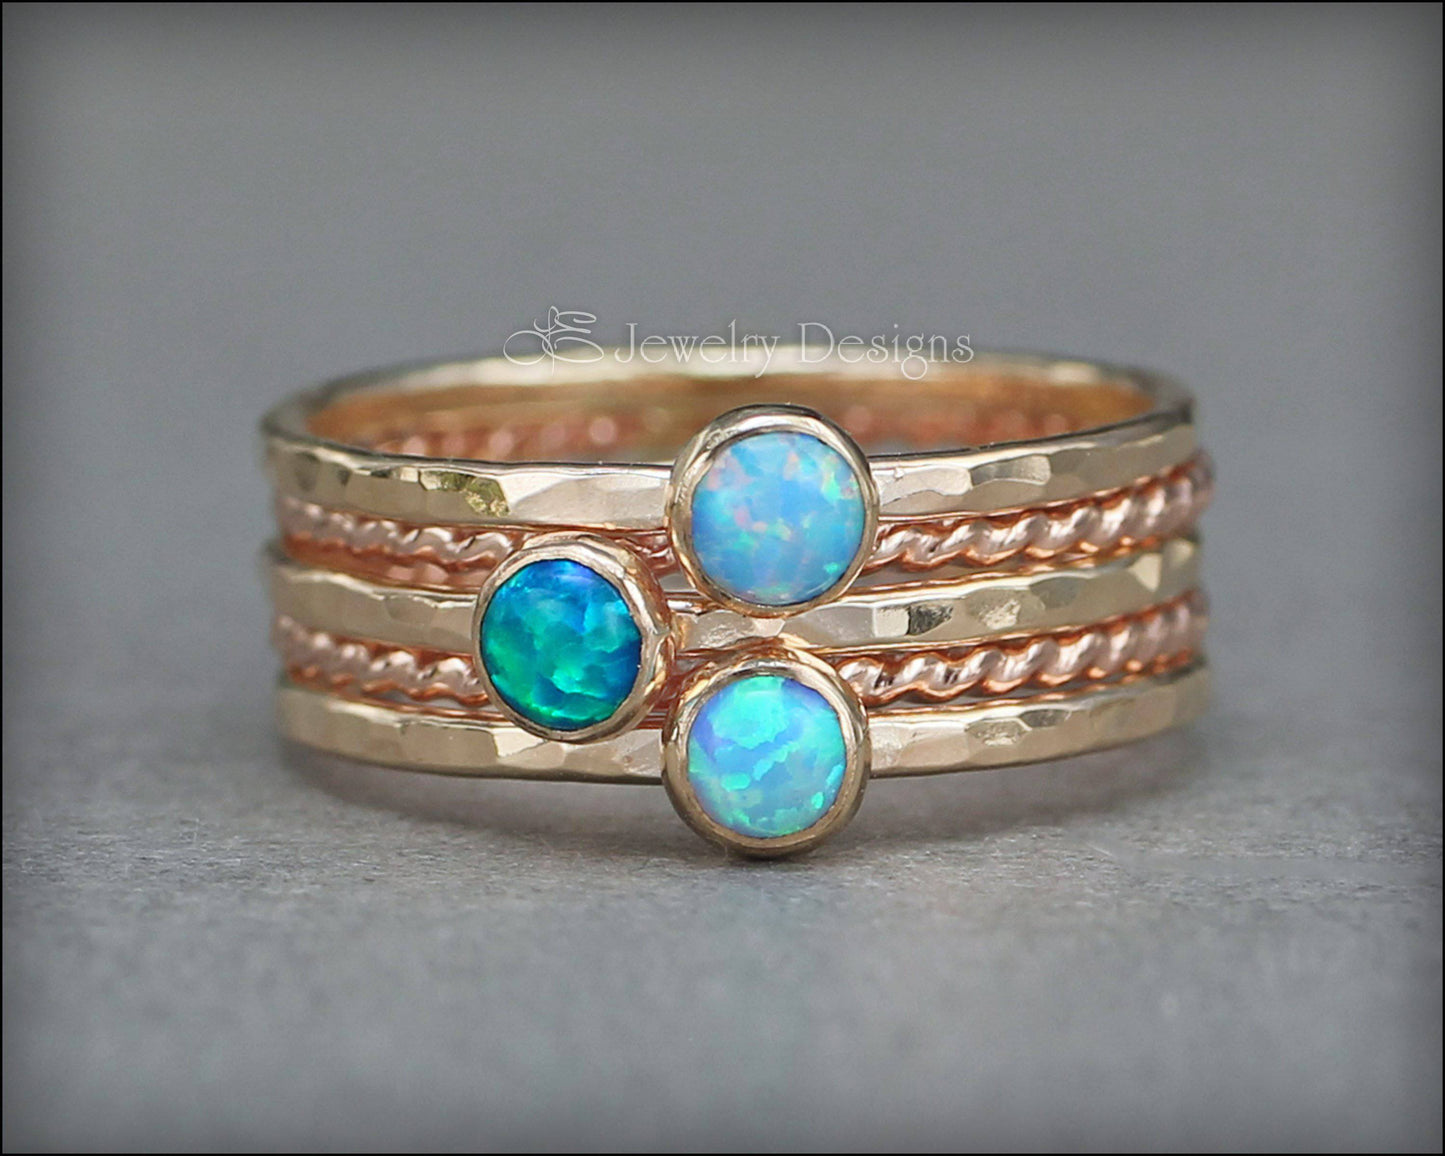 Opal Ring Set - (with 3 opals) - LE Jewelry Designs